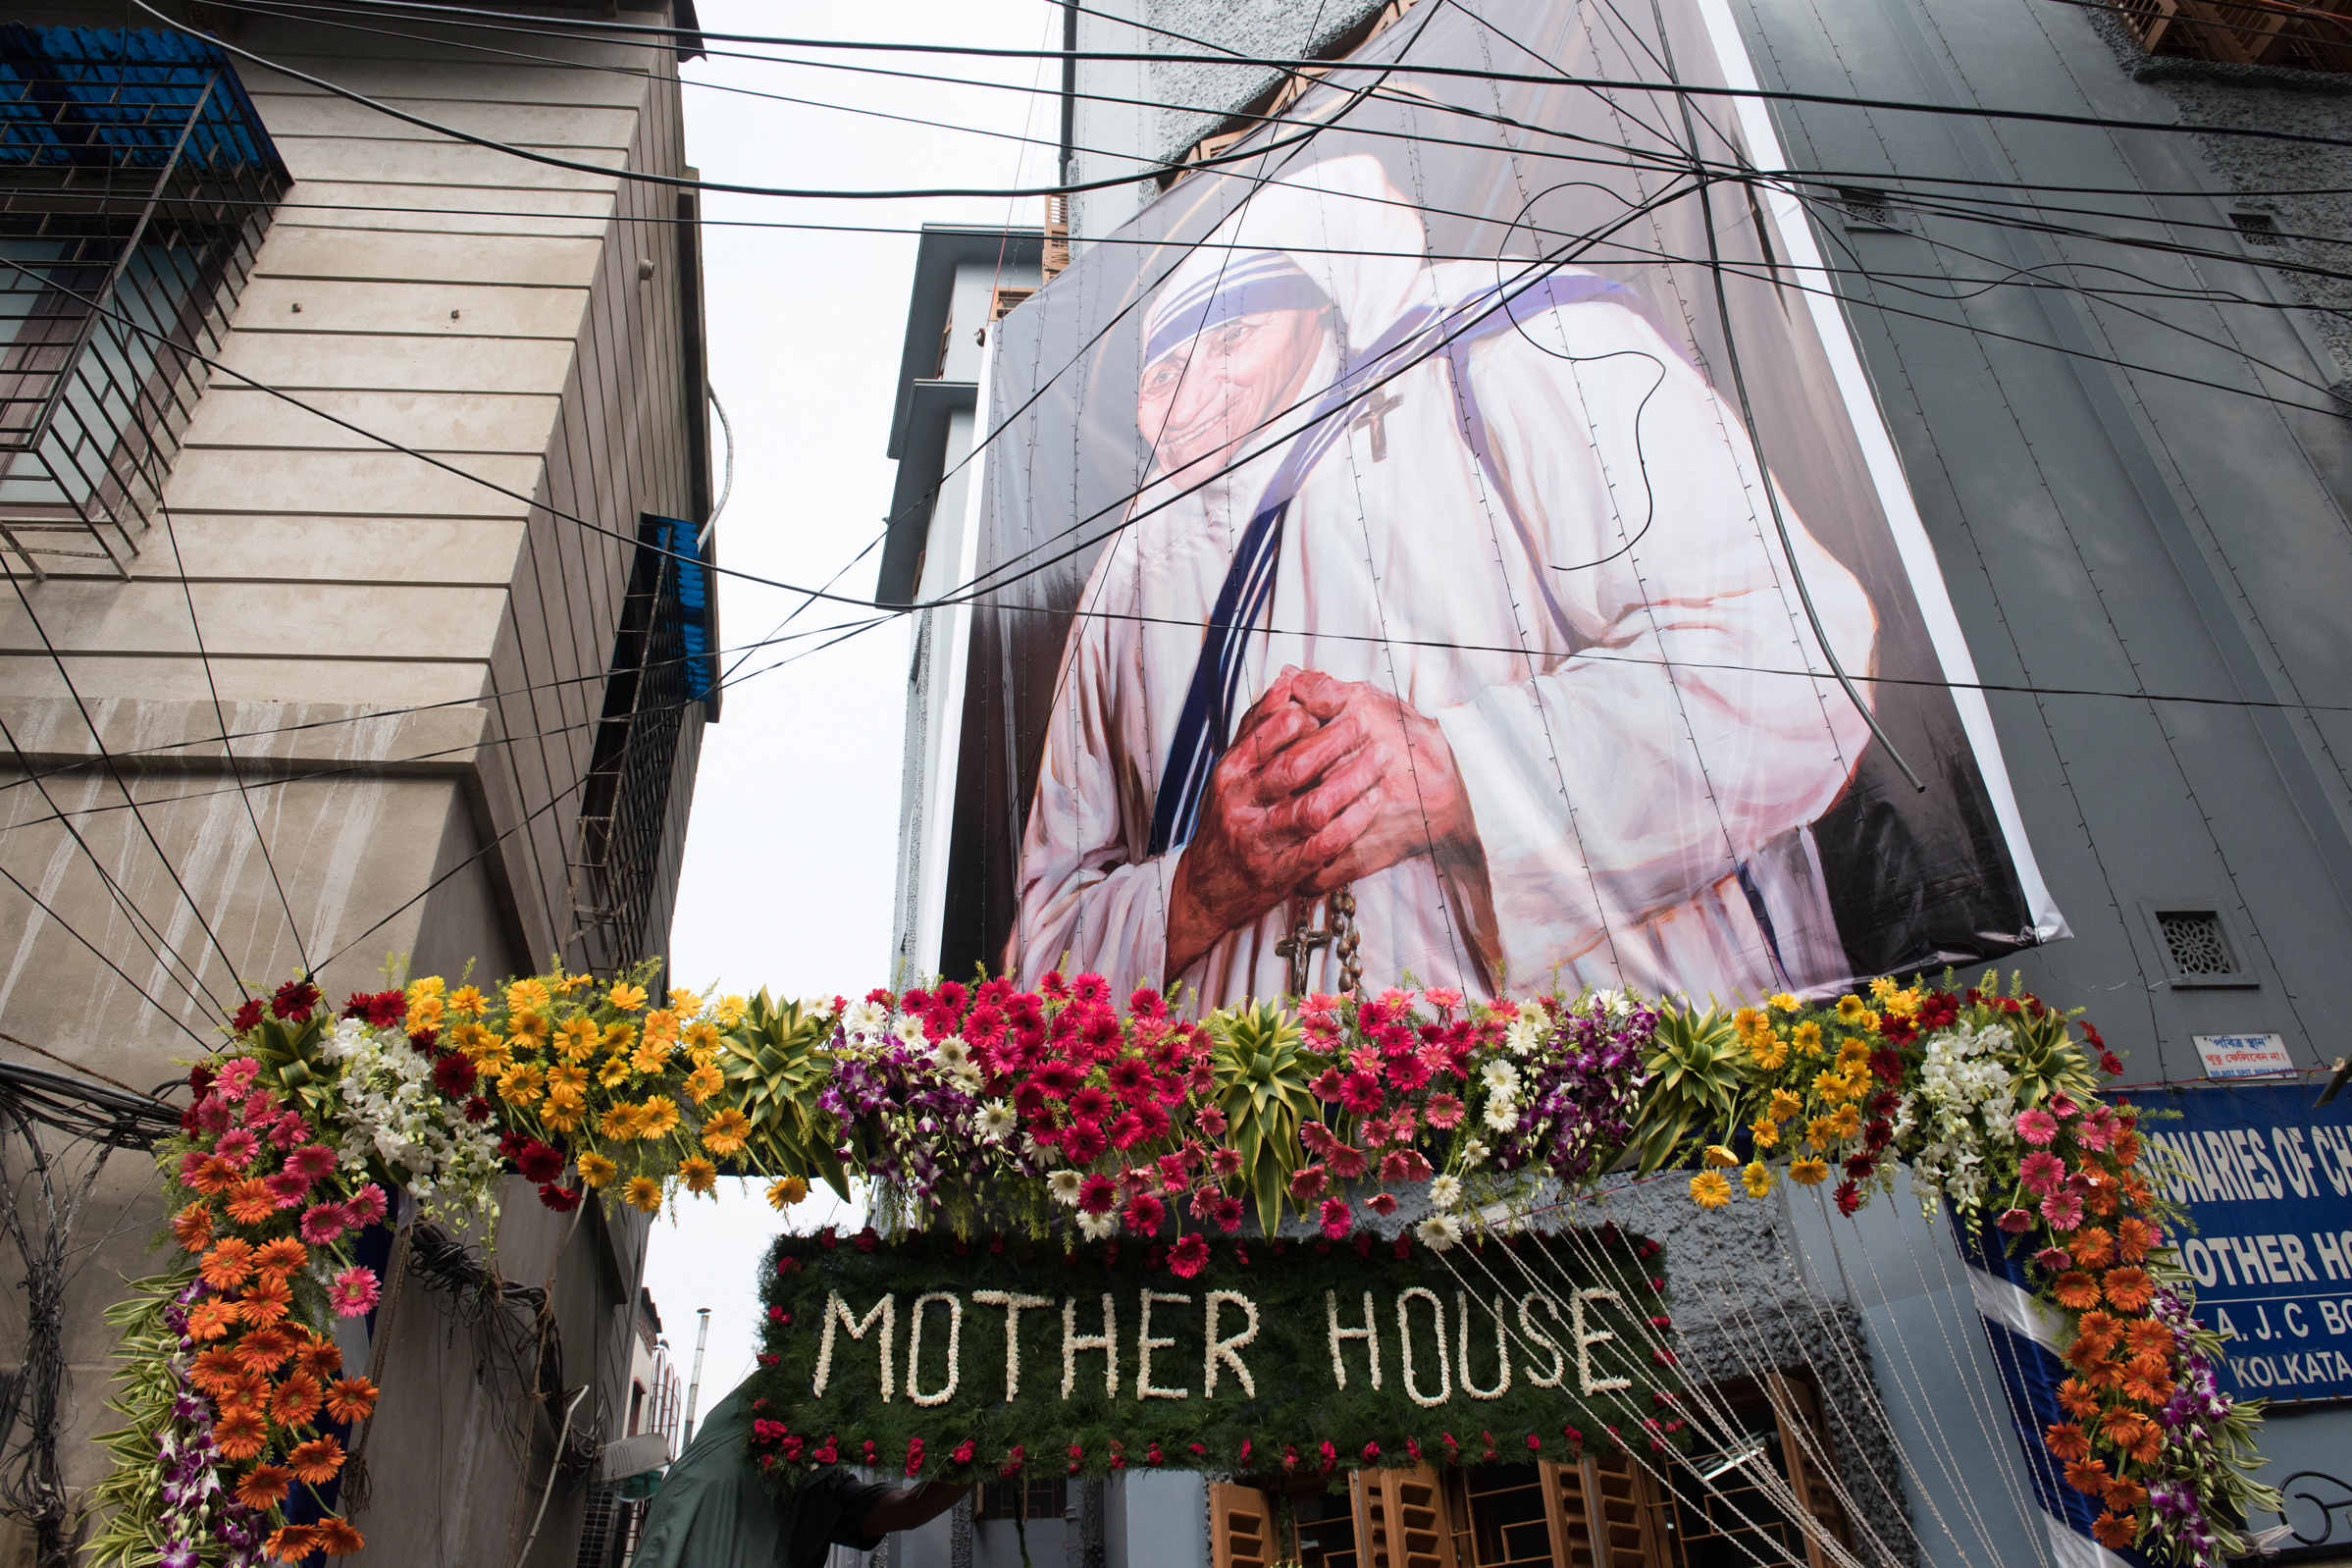 KOLKATA, INDIA 4 SEPT: Images from the Canonization of Saint Mother Teresa at the Motherhouse in Calcutta, India.